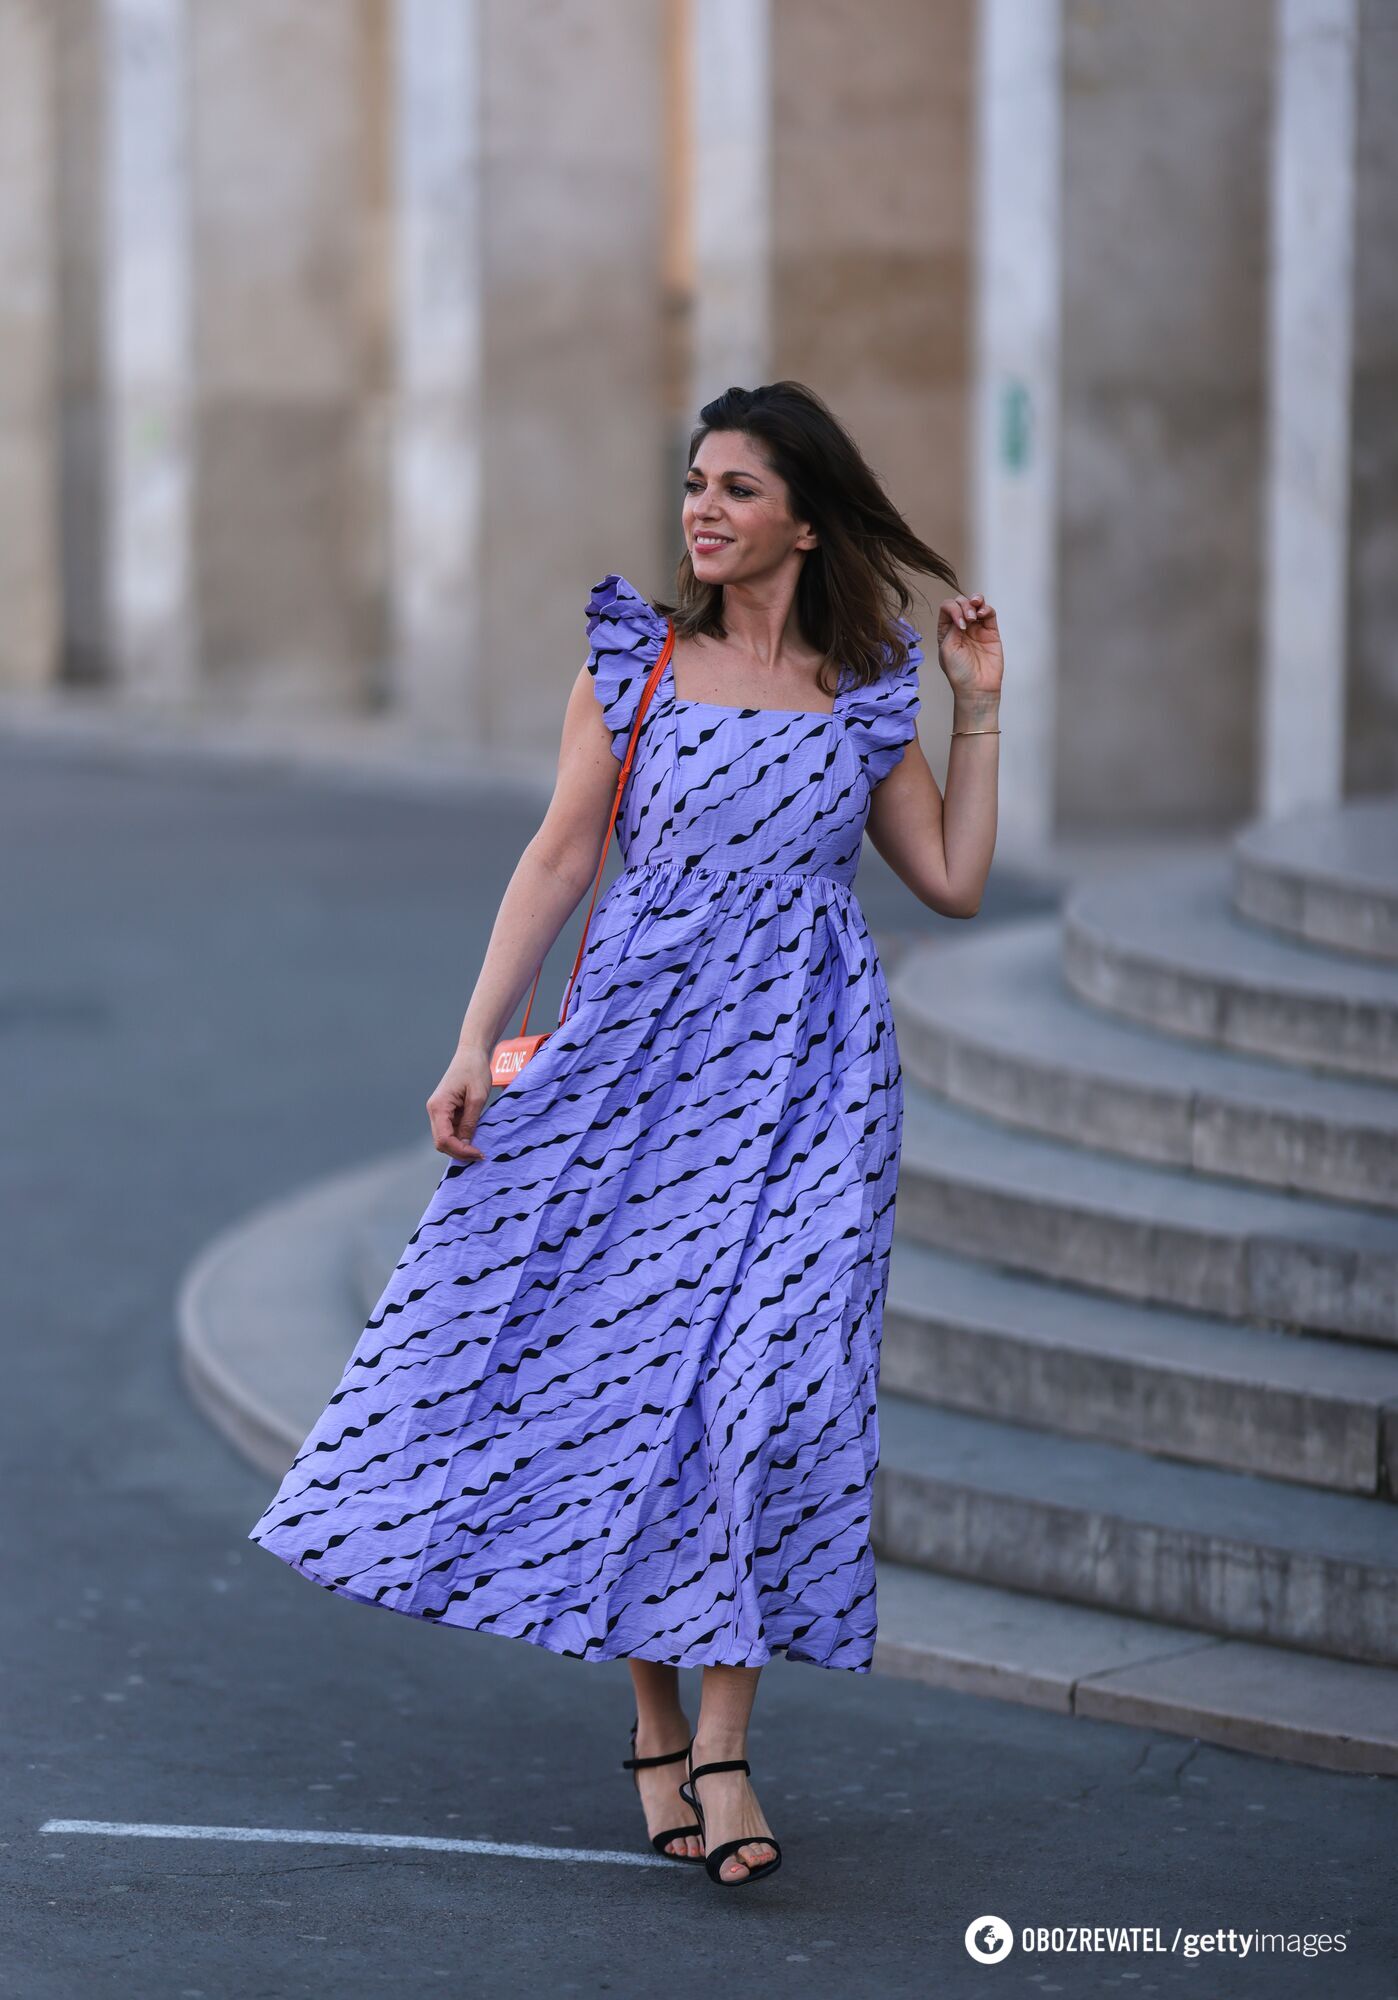 Forget about them: 5 types of dresses that are hopelessly outdated